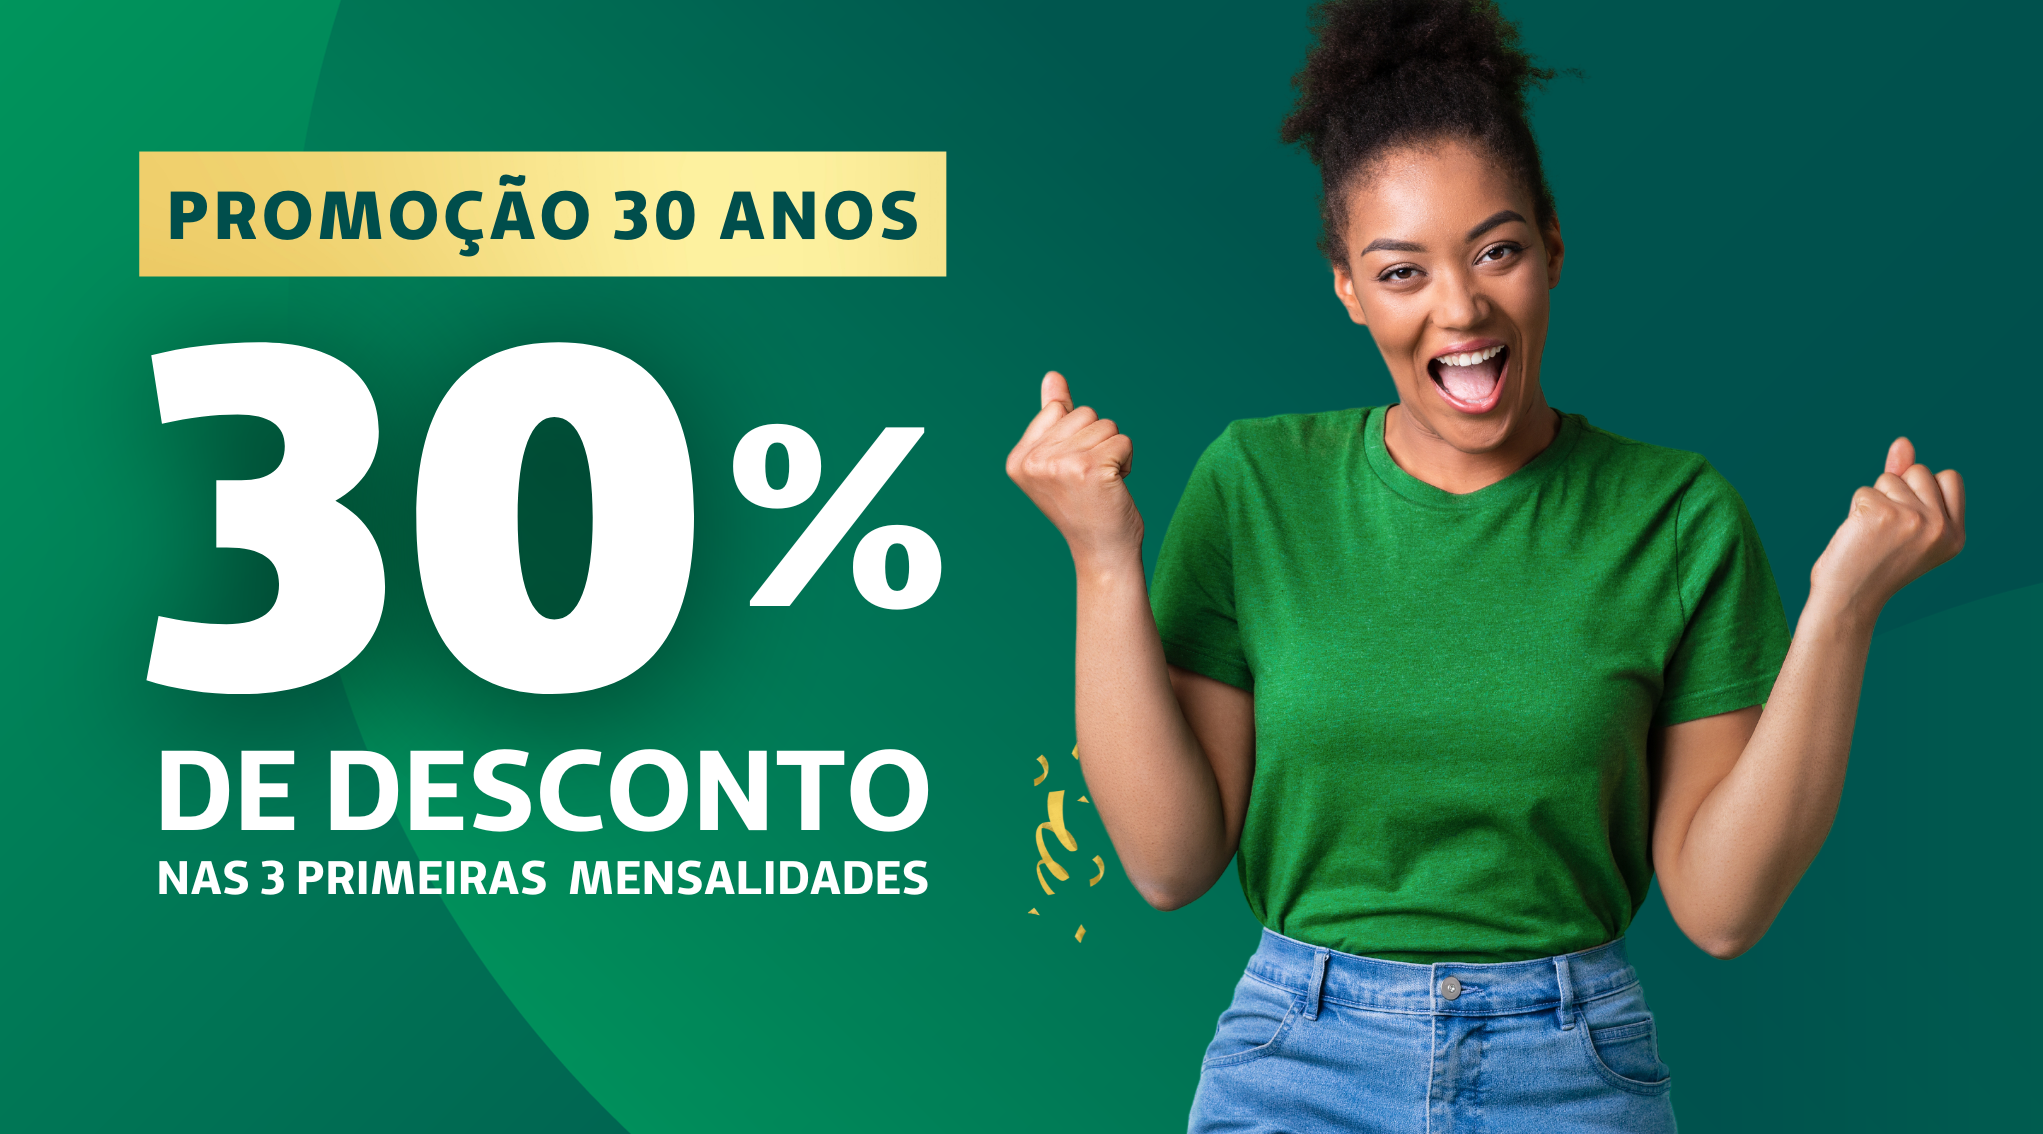 https://www.unimed.coop.br/site/o/sites-theme/images/cards-noticias/capa_pequena.png